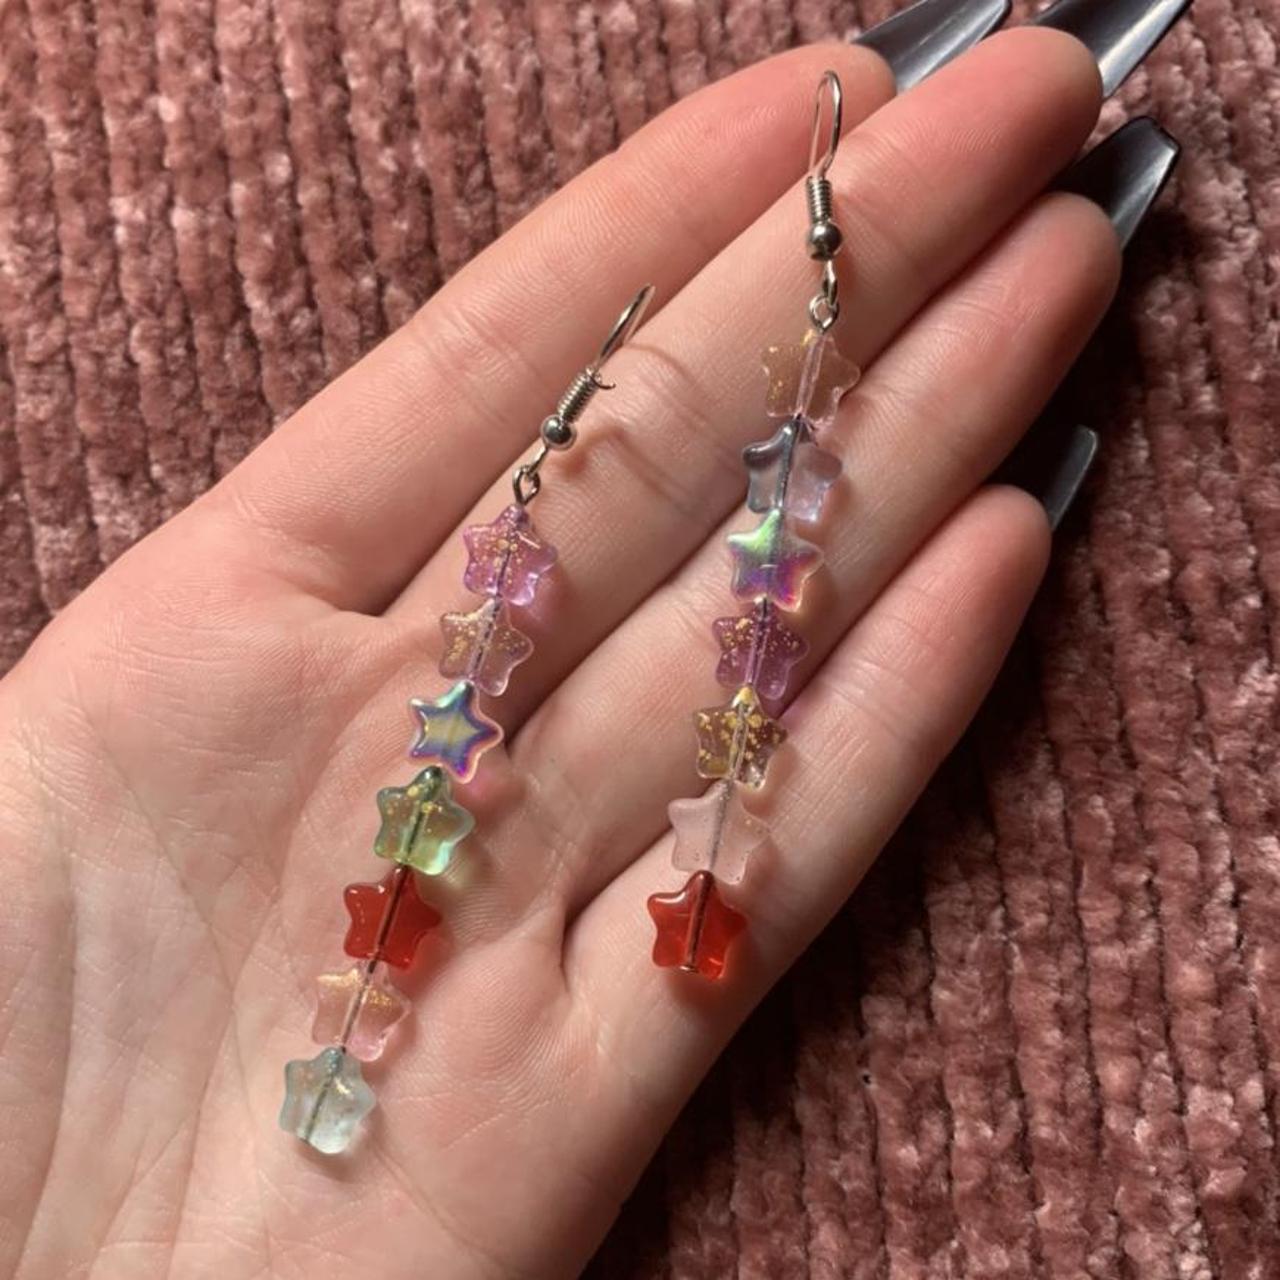 Product Image 1 - Multicolored glass star earrings! 🦋

These